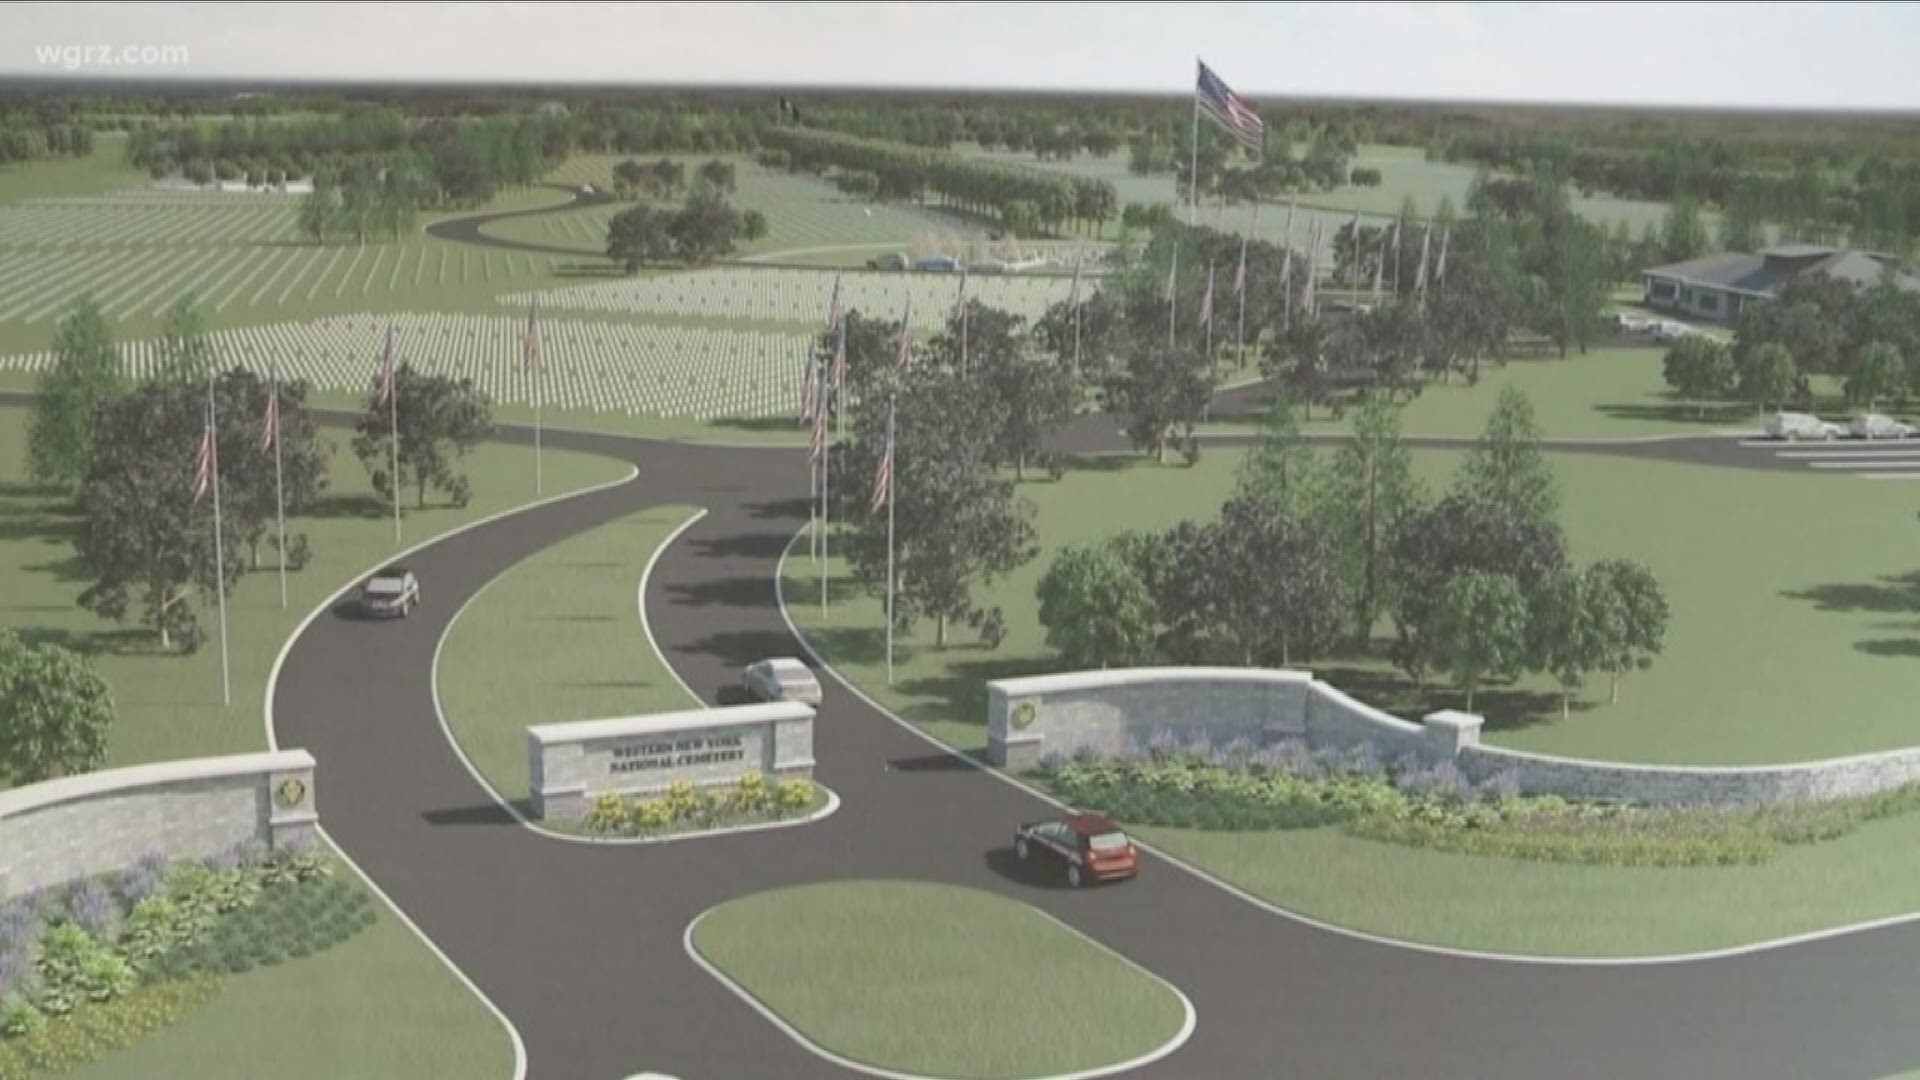 VA to give update on WNY Veterans' Cemetery